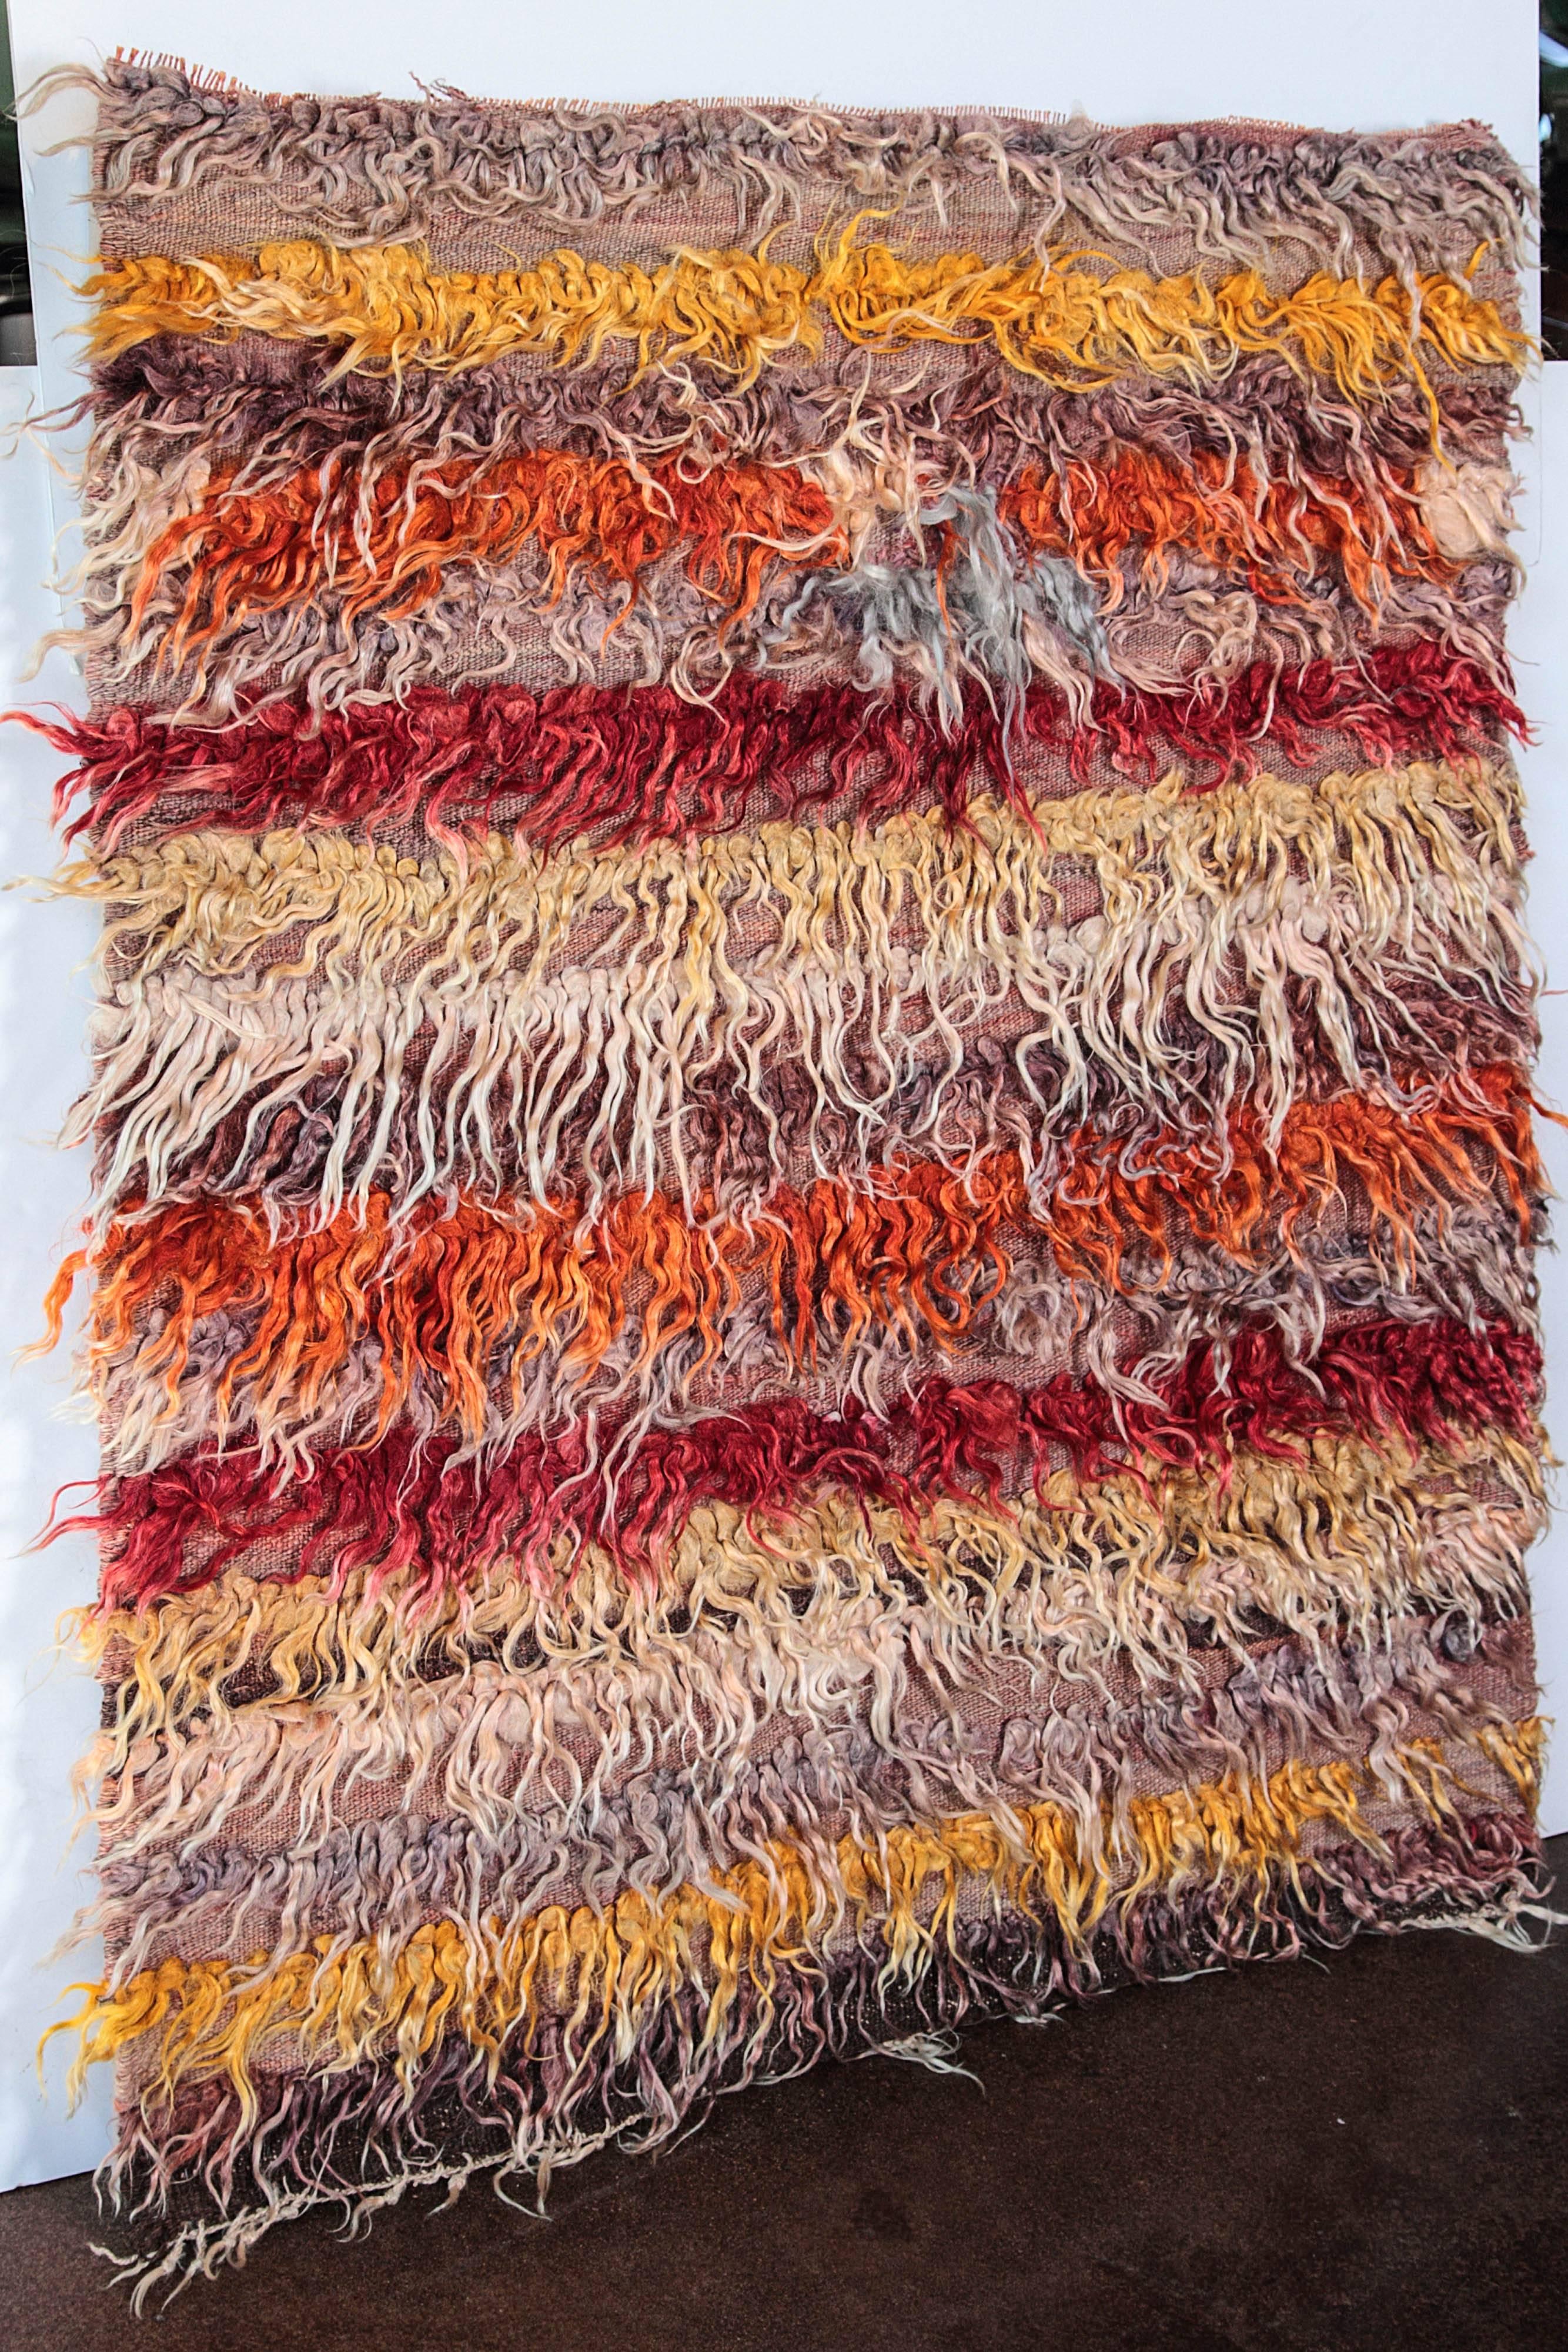 Tulu Shaggy rug portrait
Vintage vibrant color Turkish Tulu Shaggy rug with abstract design
Made from local Angora type goats` wool hand-knotted on a woollen Kilim.
Tulus are handwoven in central Turkey with extremely long angora wool